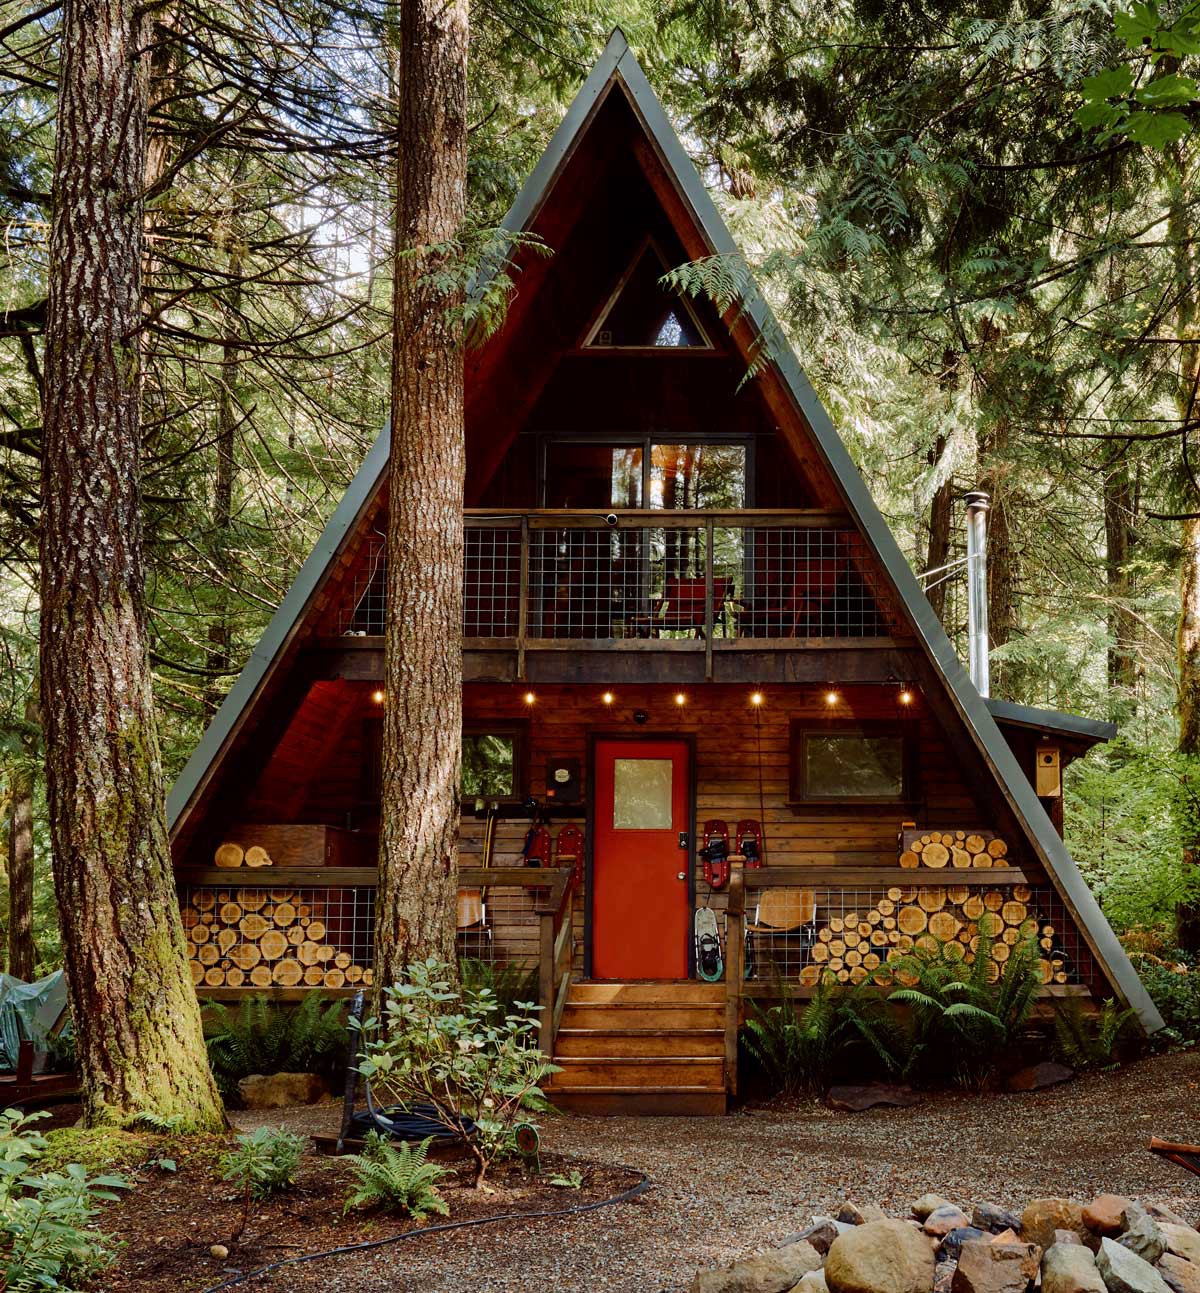 An A-frame house surrounded by pine trees in Washington state.